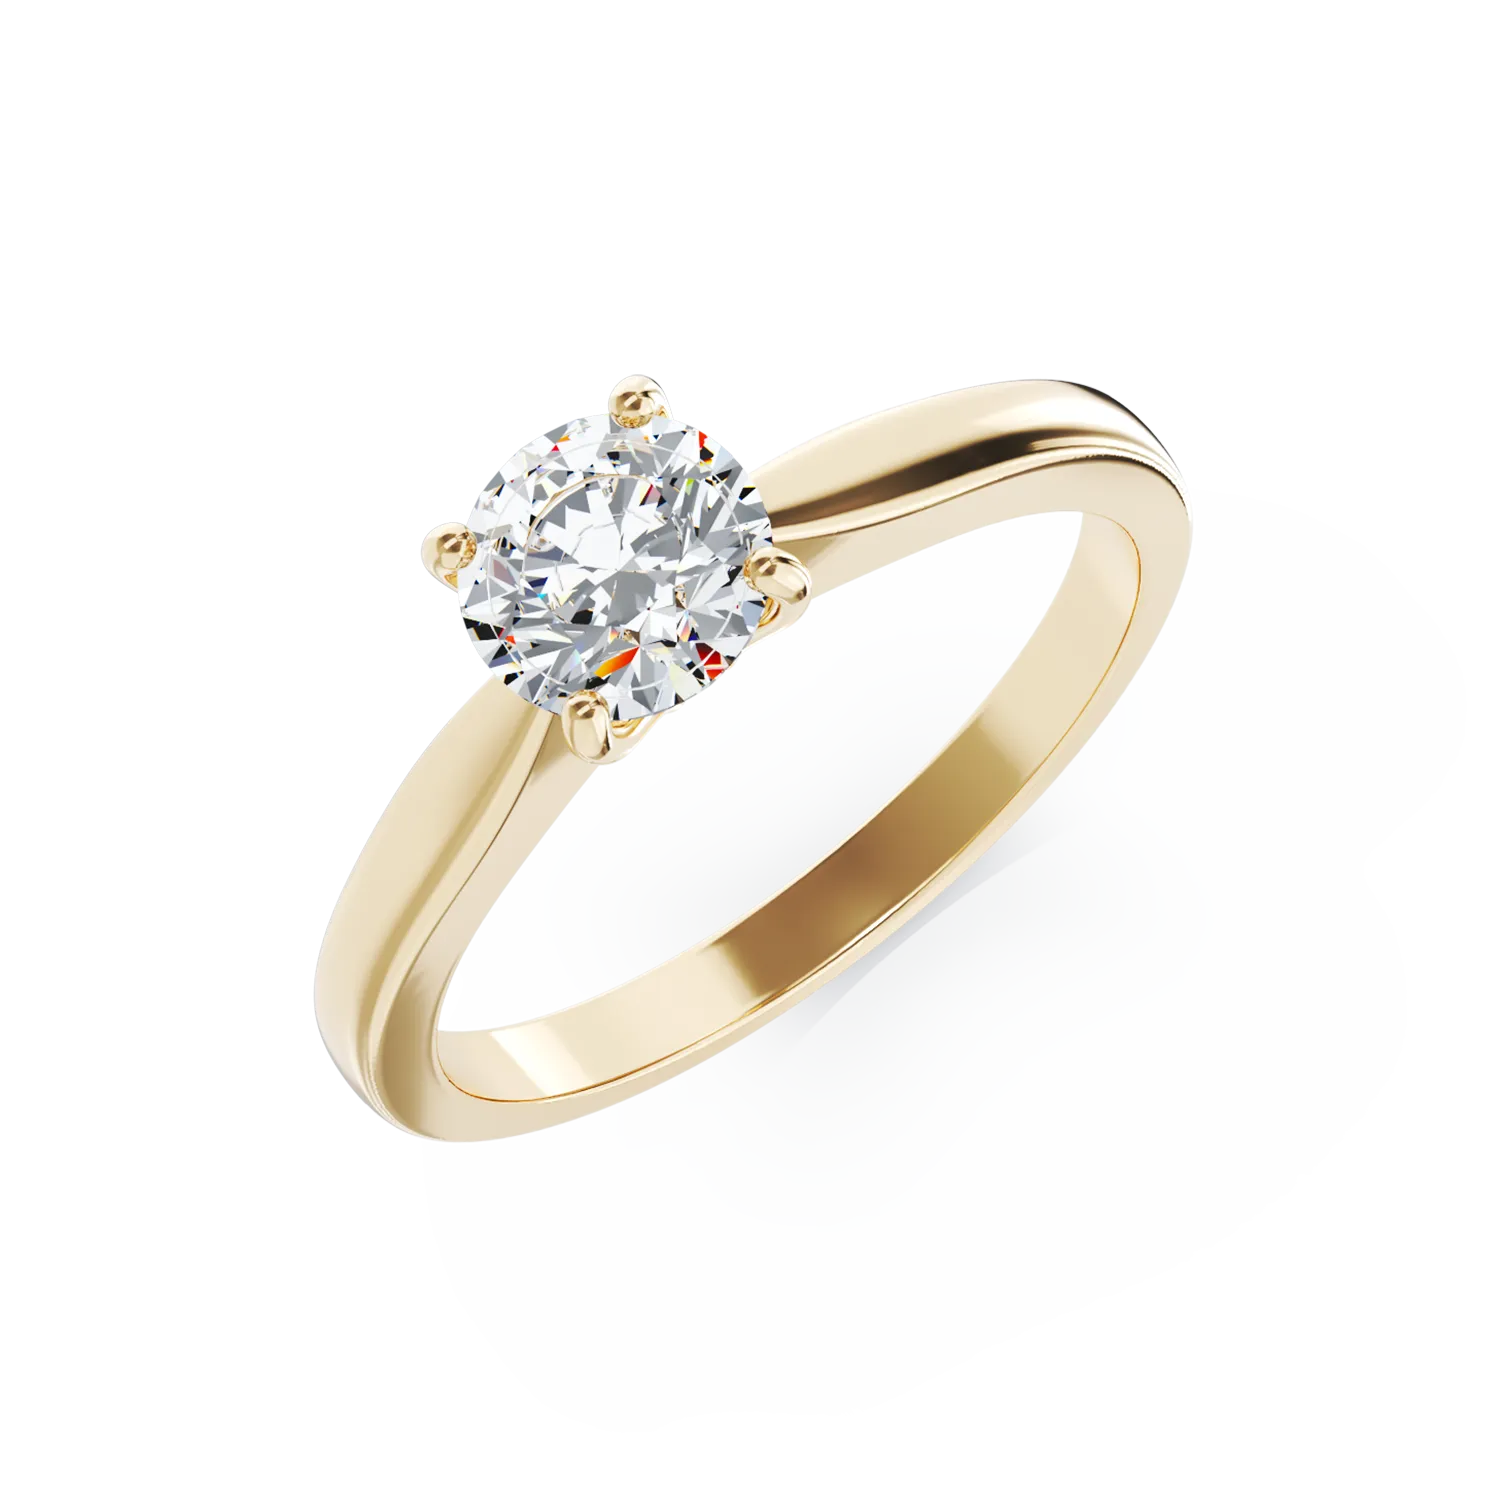 18K yellow gold engagement ring with 0.9ct diamond